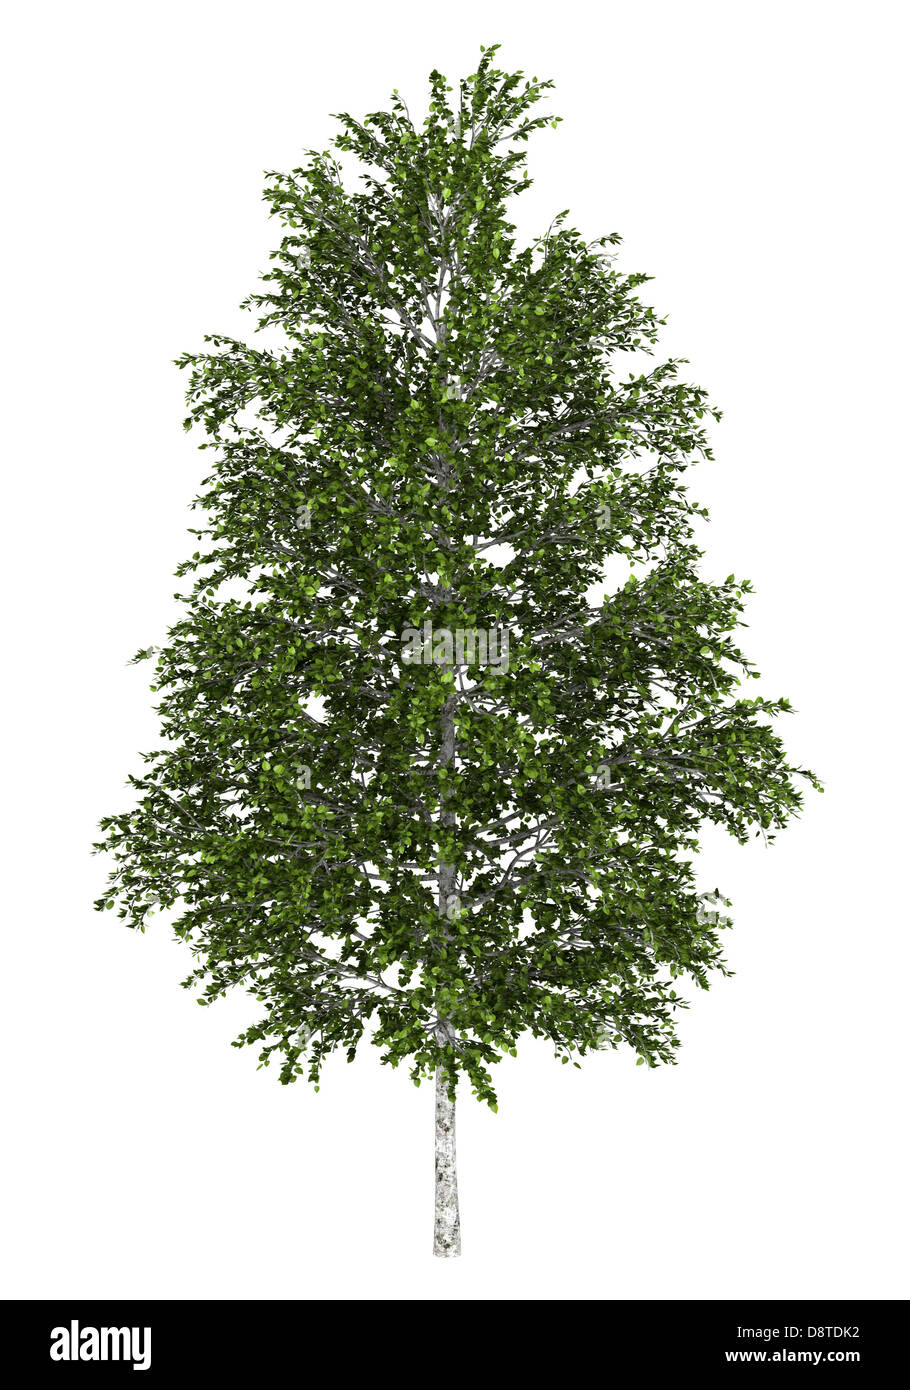 Bouleau blanc européen tree isolated on white Banque D'Images